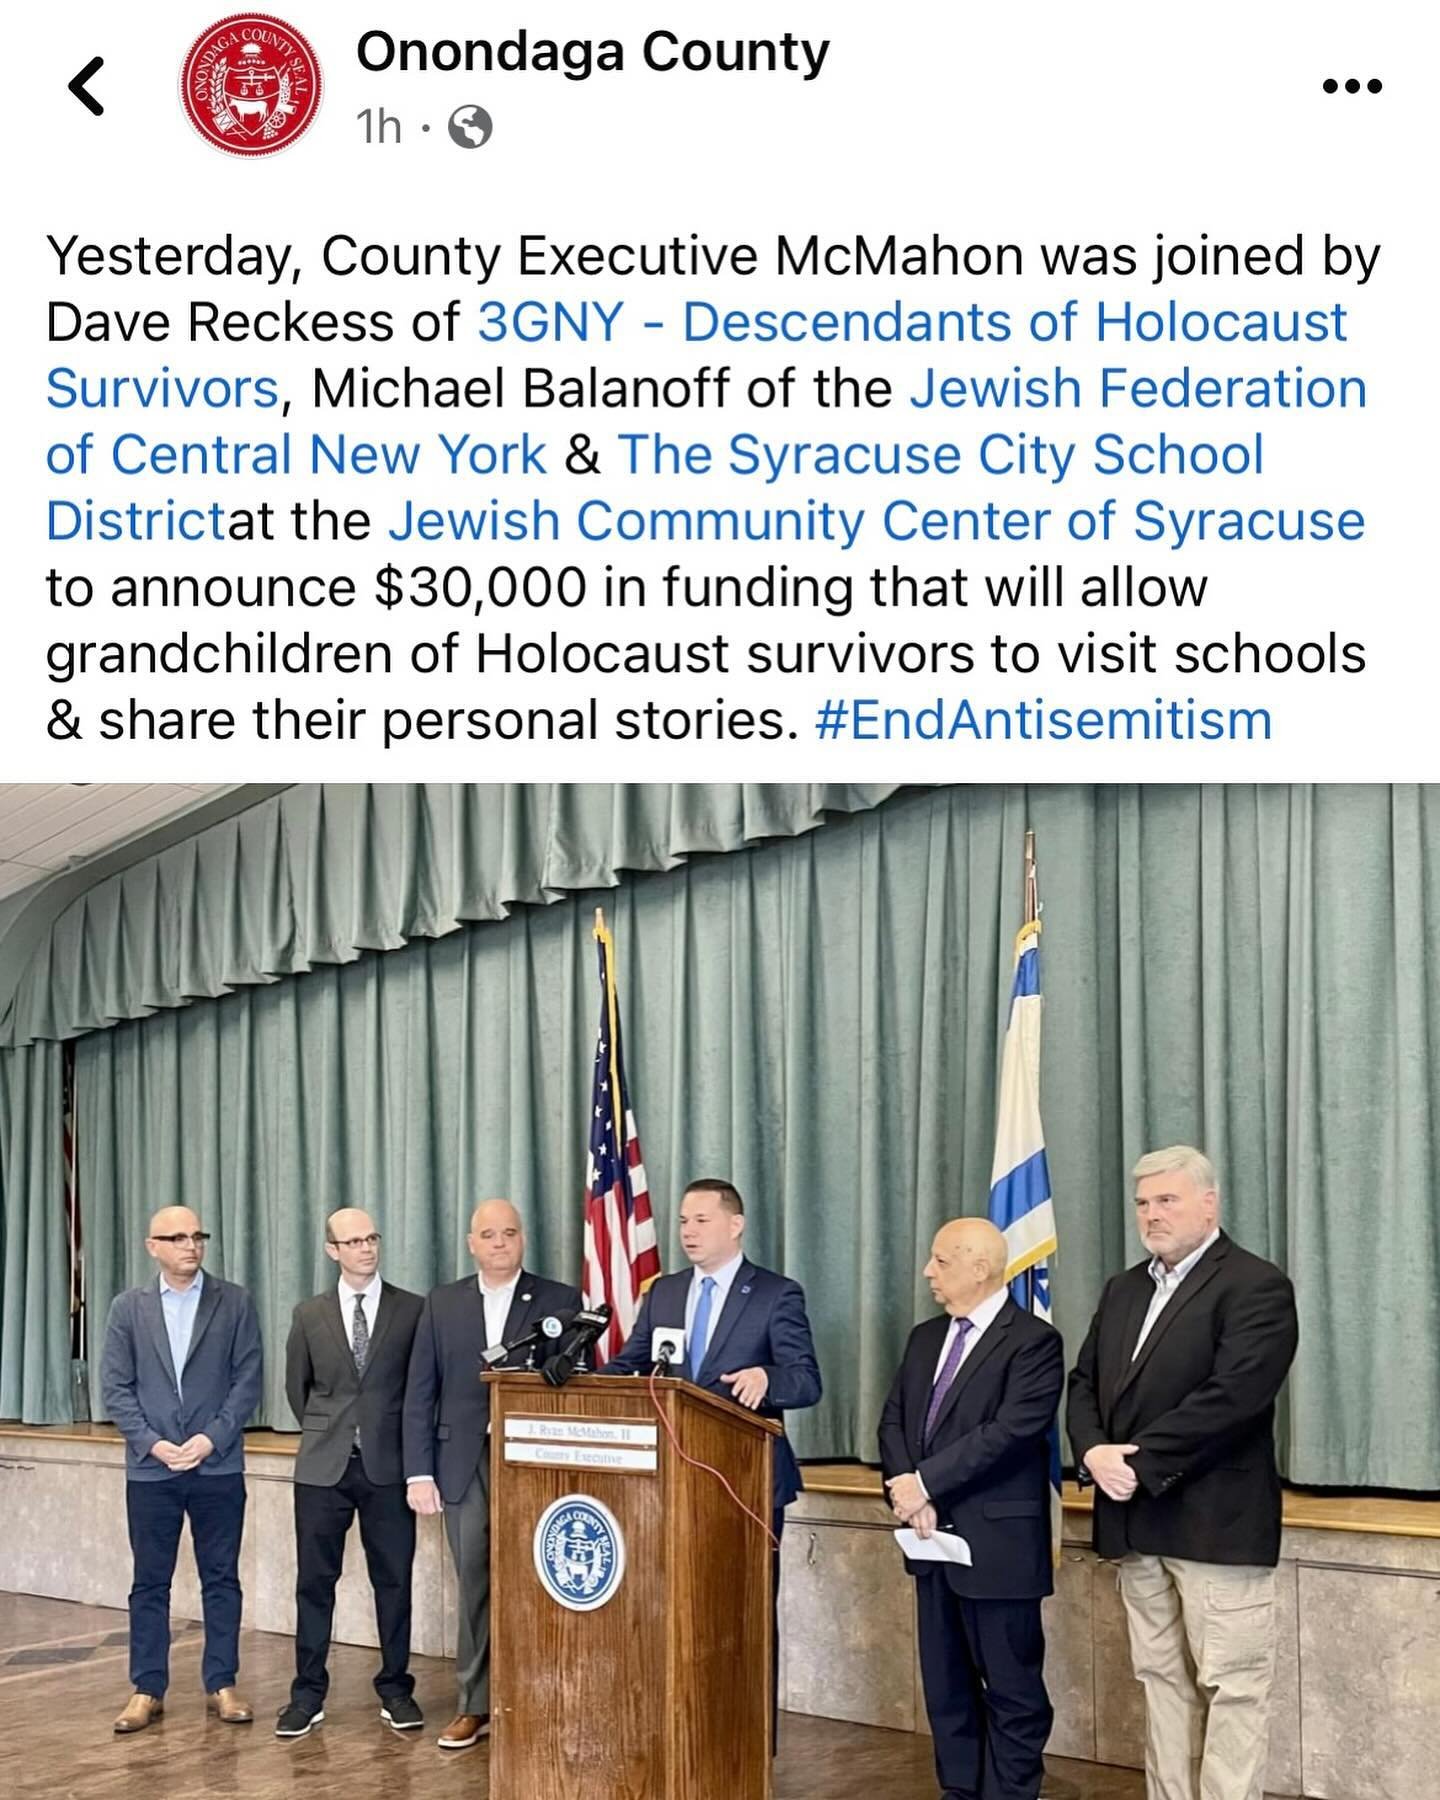 Excited and grateful to share this news from @onondagacountyny! Thank you to Onondaga County and County Executive Ryan McMahon for their support of 3GNY and their commitment to confronting antisemitism through Holocaust education and testimony. 

We 